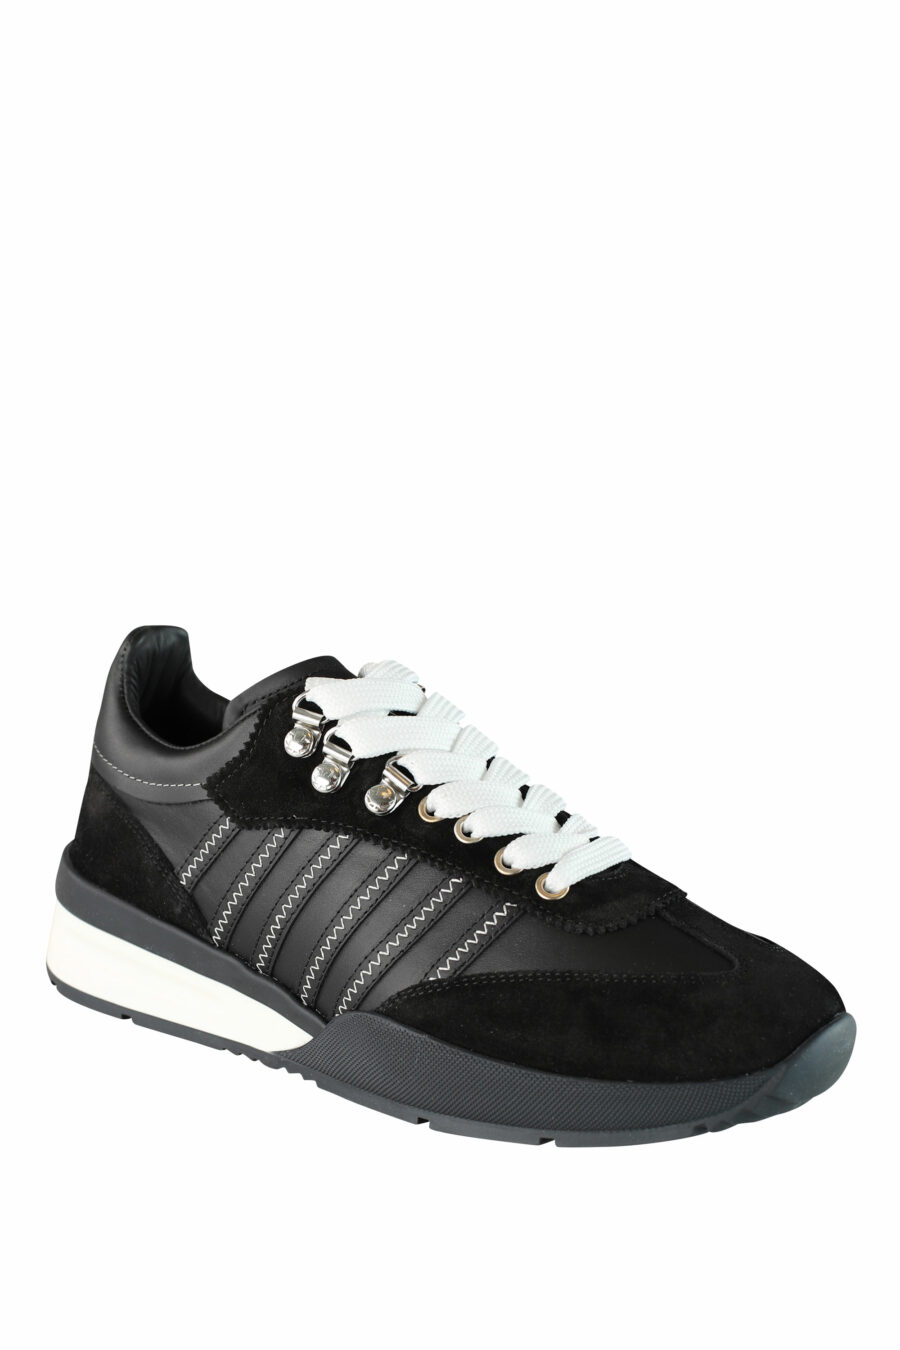 Original legend" black mix trainers with two-tone sole and diagonal lines - IMG 1483